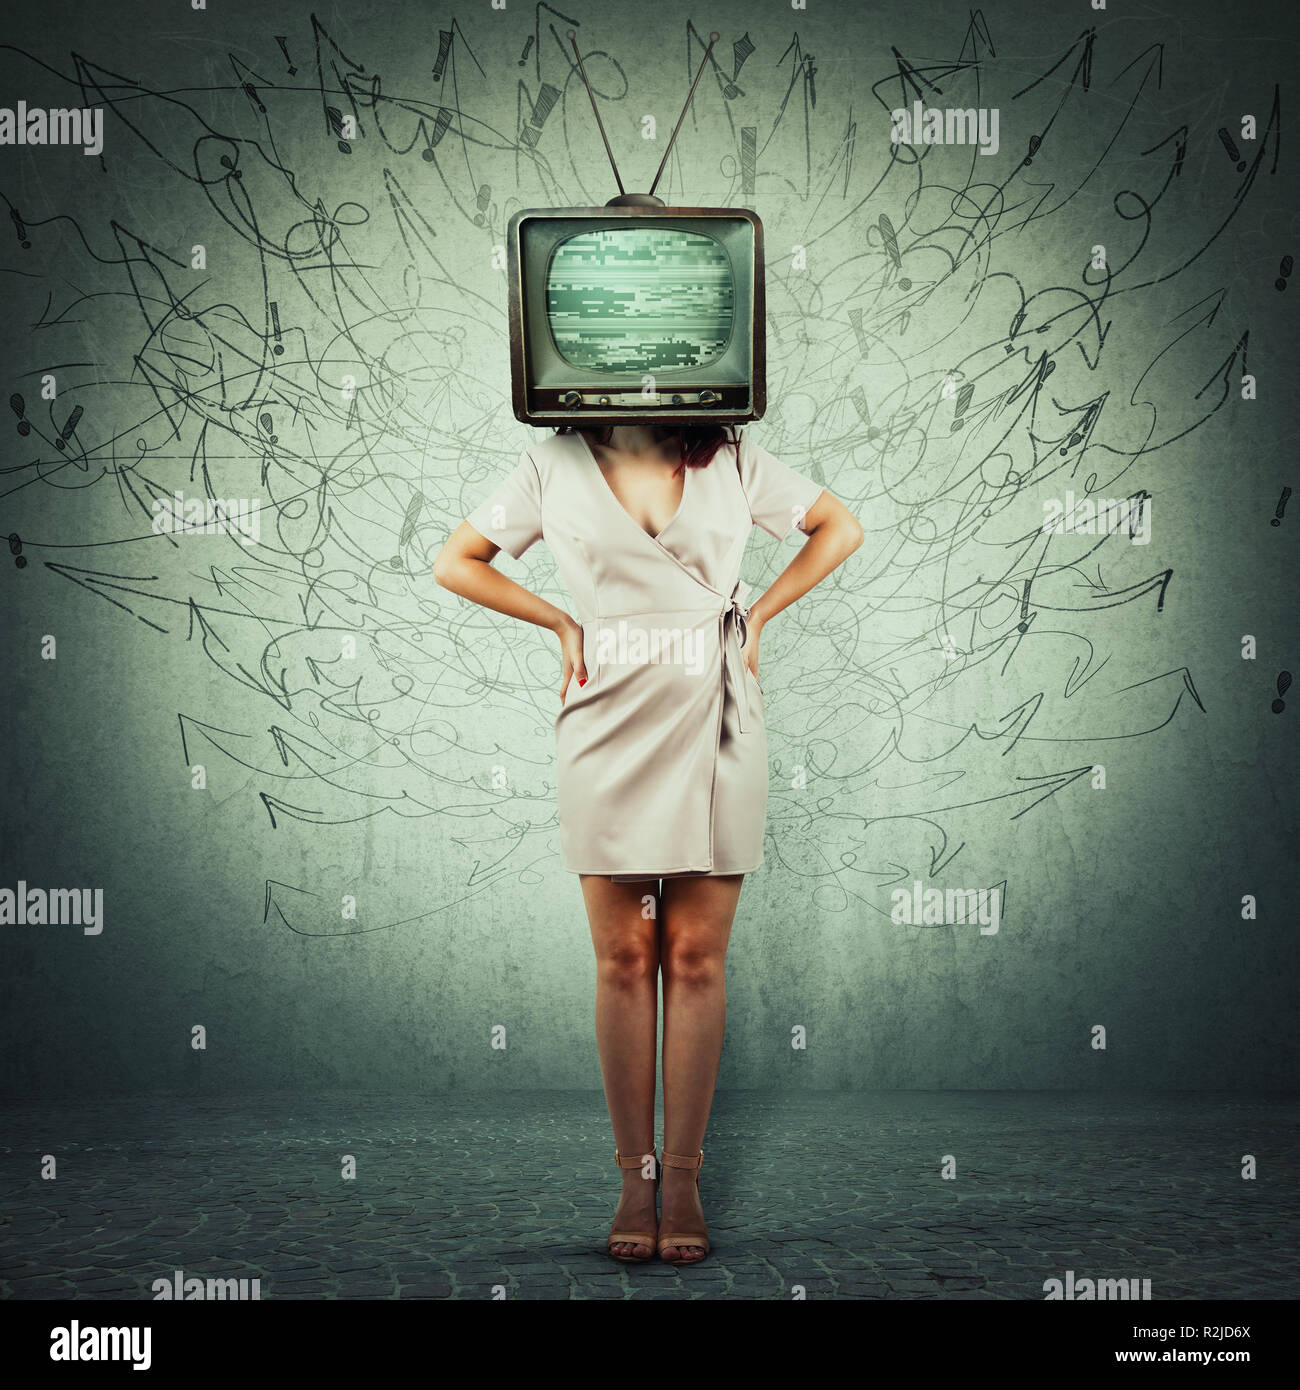 Full length portrait addicted young woman hands on hips and old tv instead of head. Television manipulation and brainwashing concept. Mass media propa Stock Photo